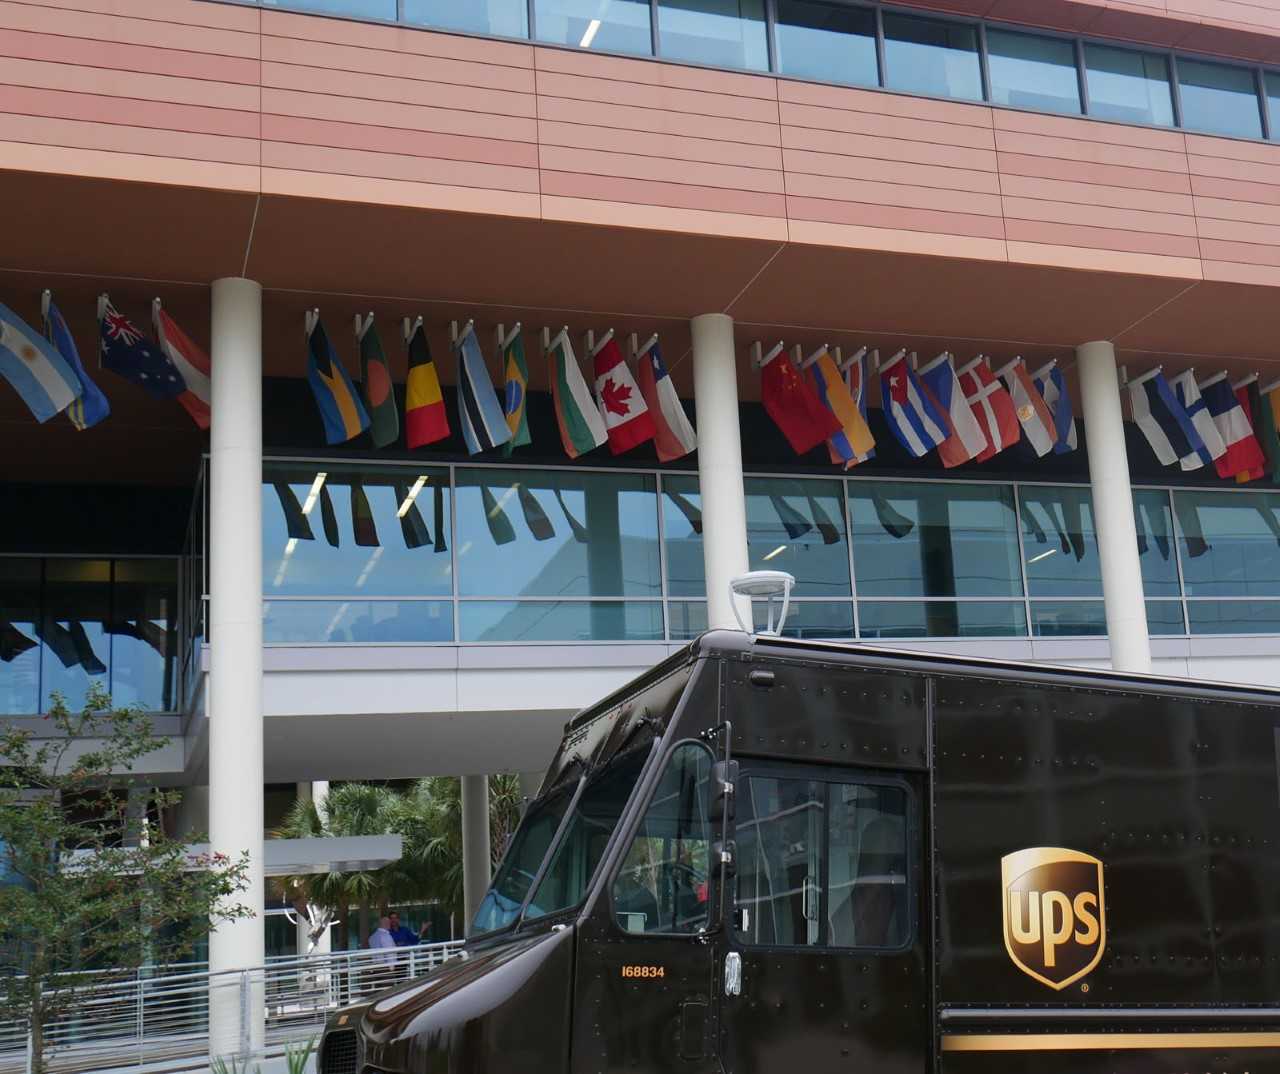 UPS truck outside the Darla Moore School of Business building